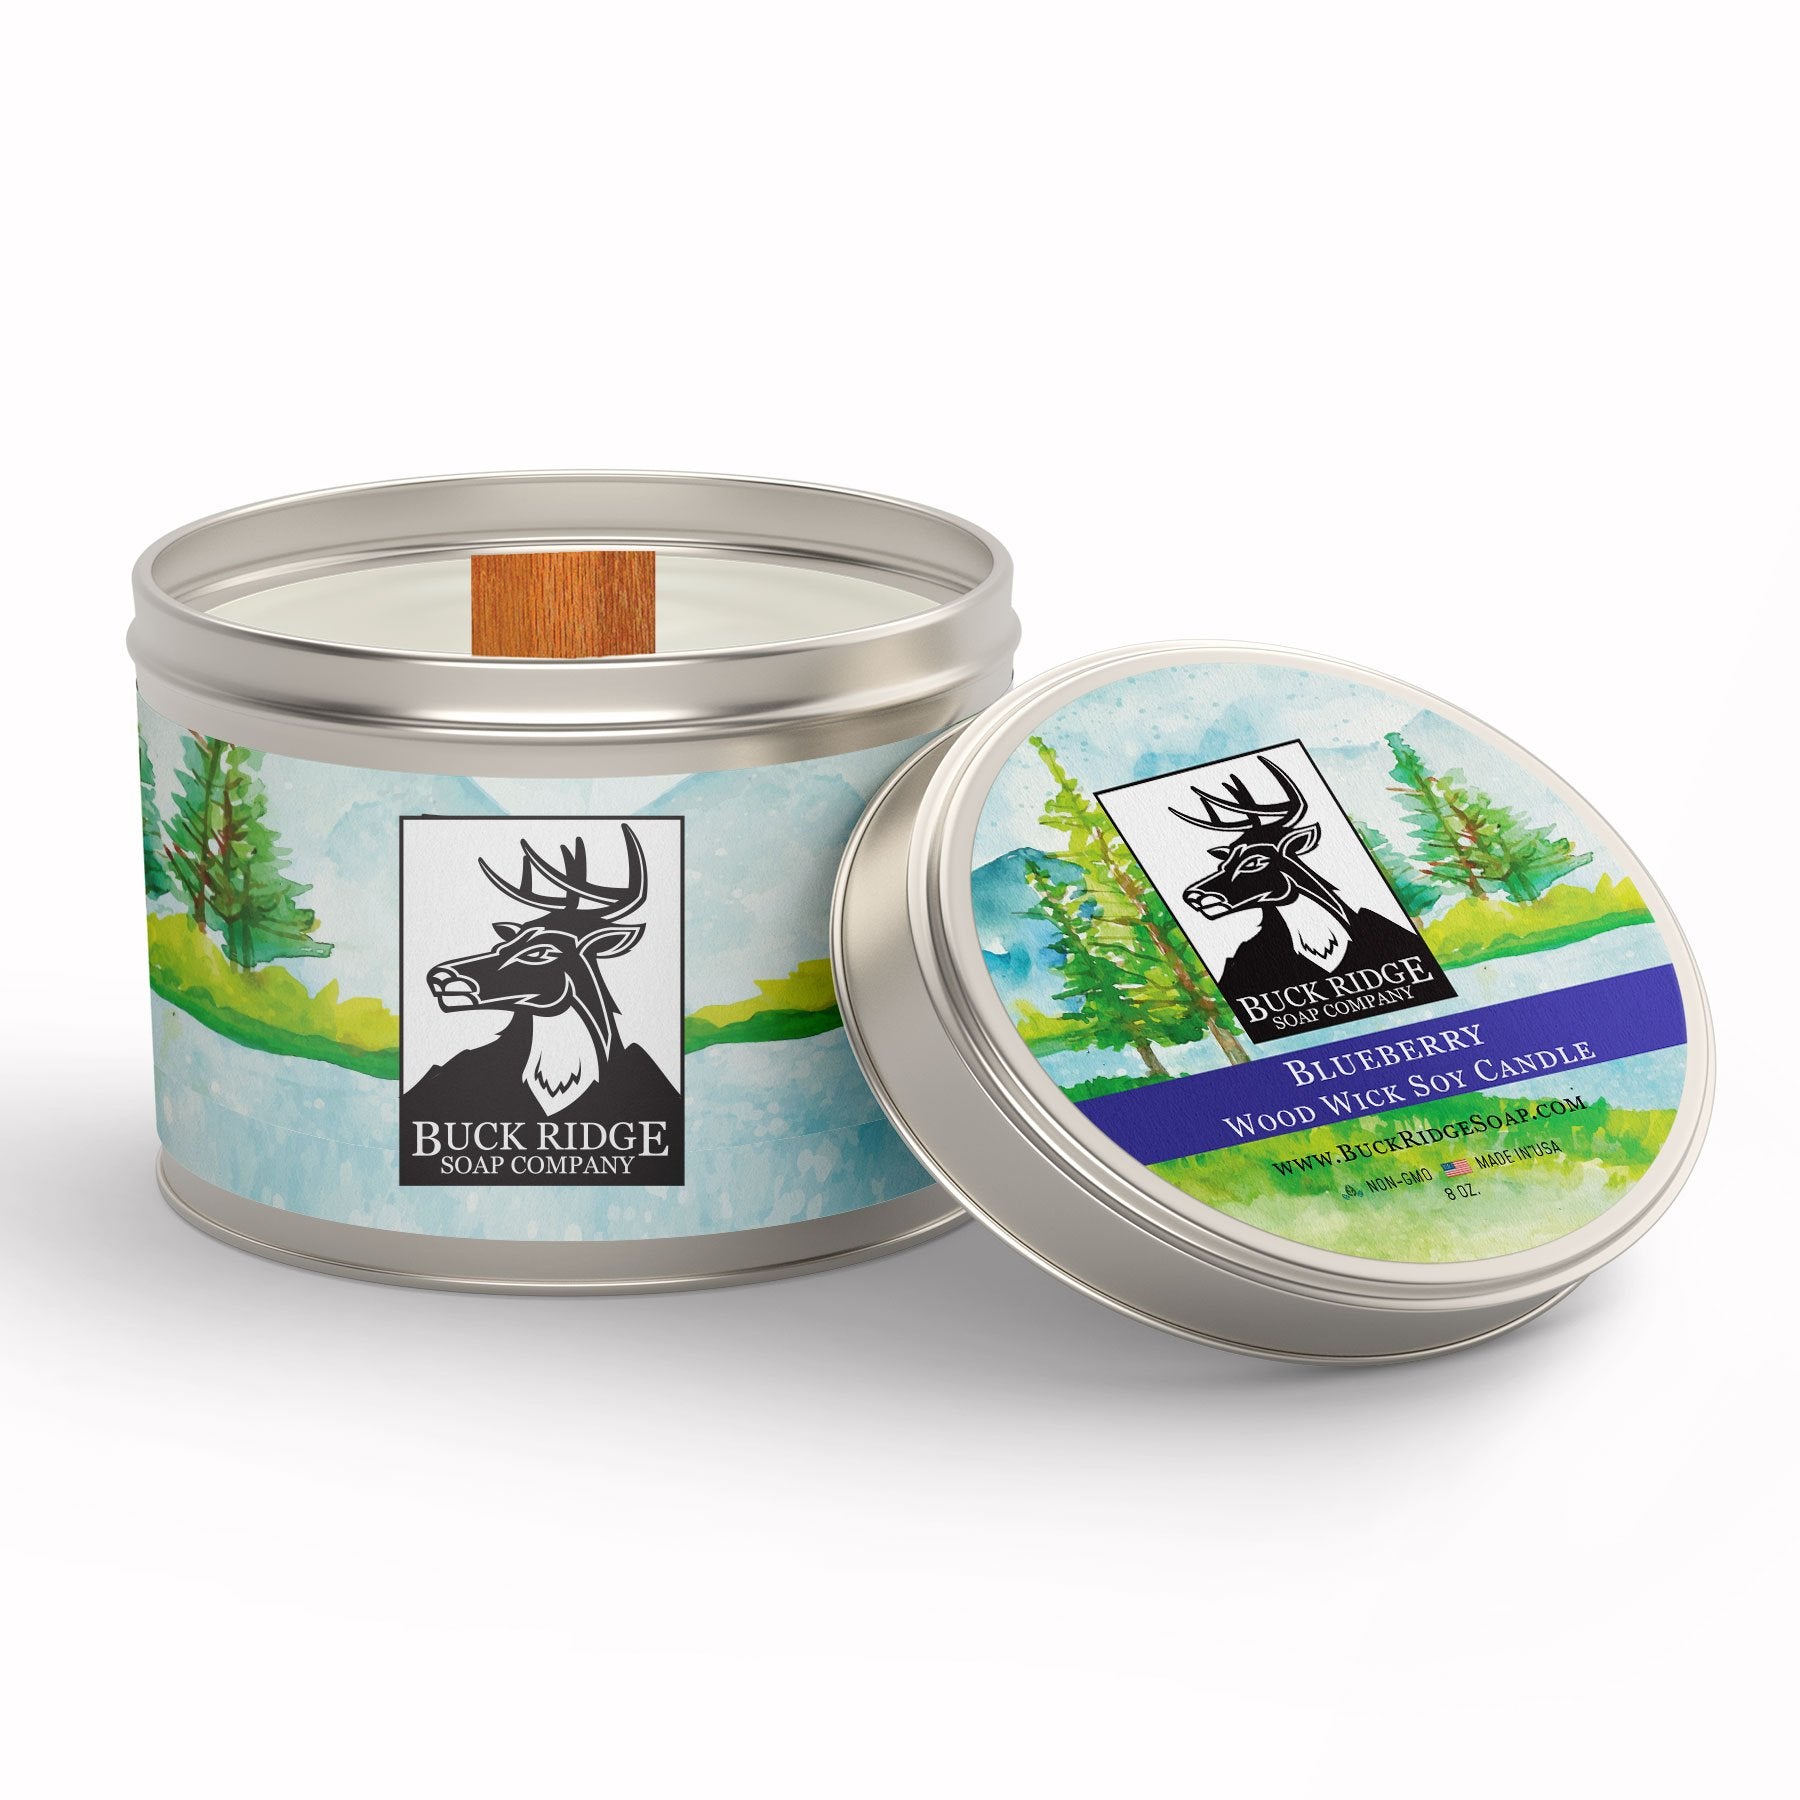 Blueberry Sustainable Wood Wick Soy Candle Buck Ridge Soap